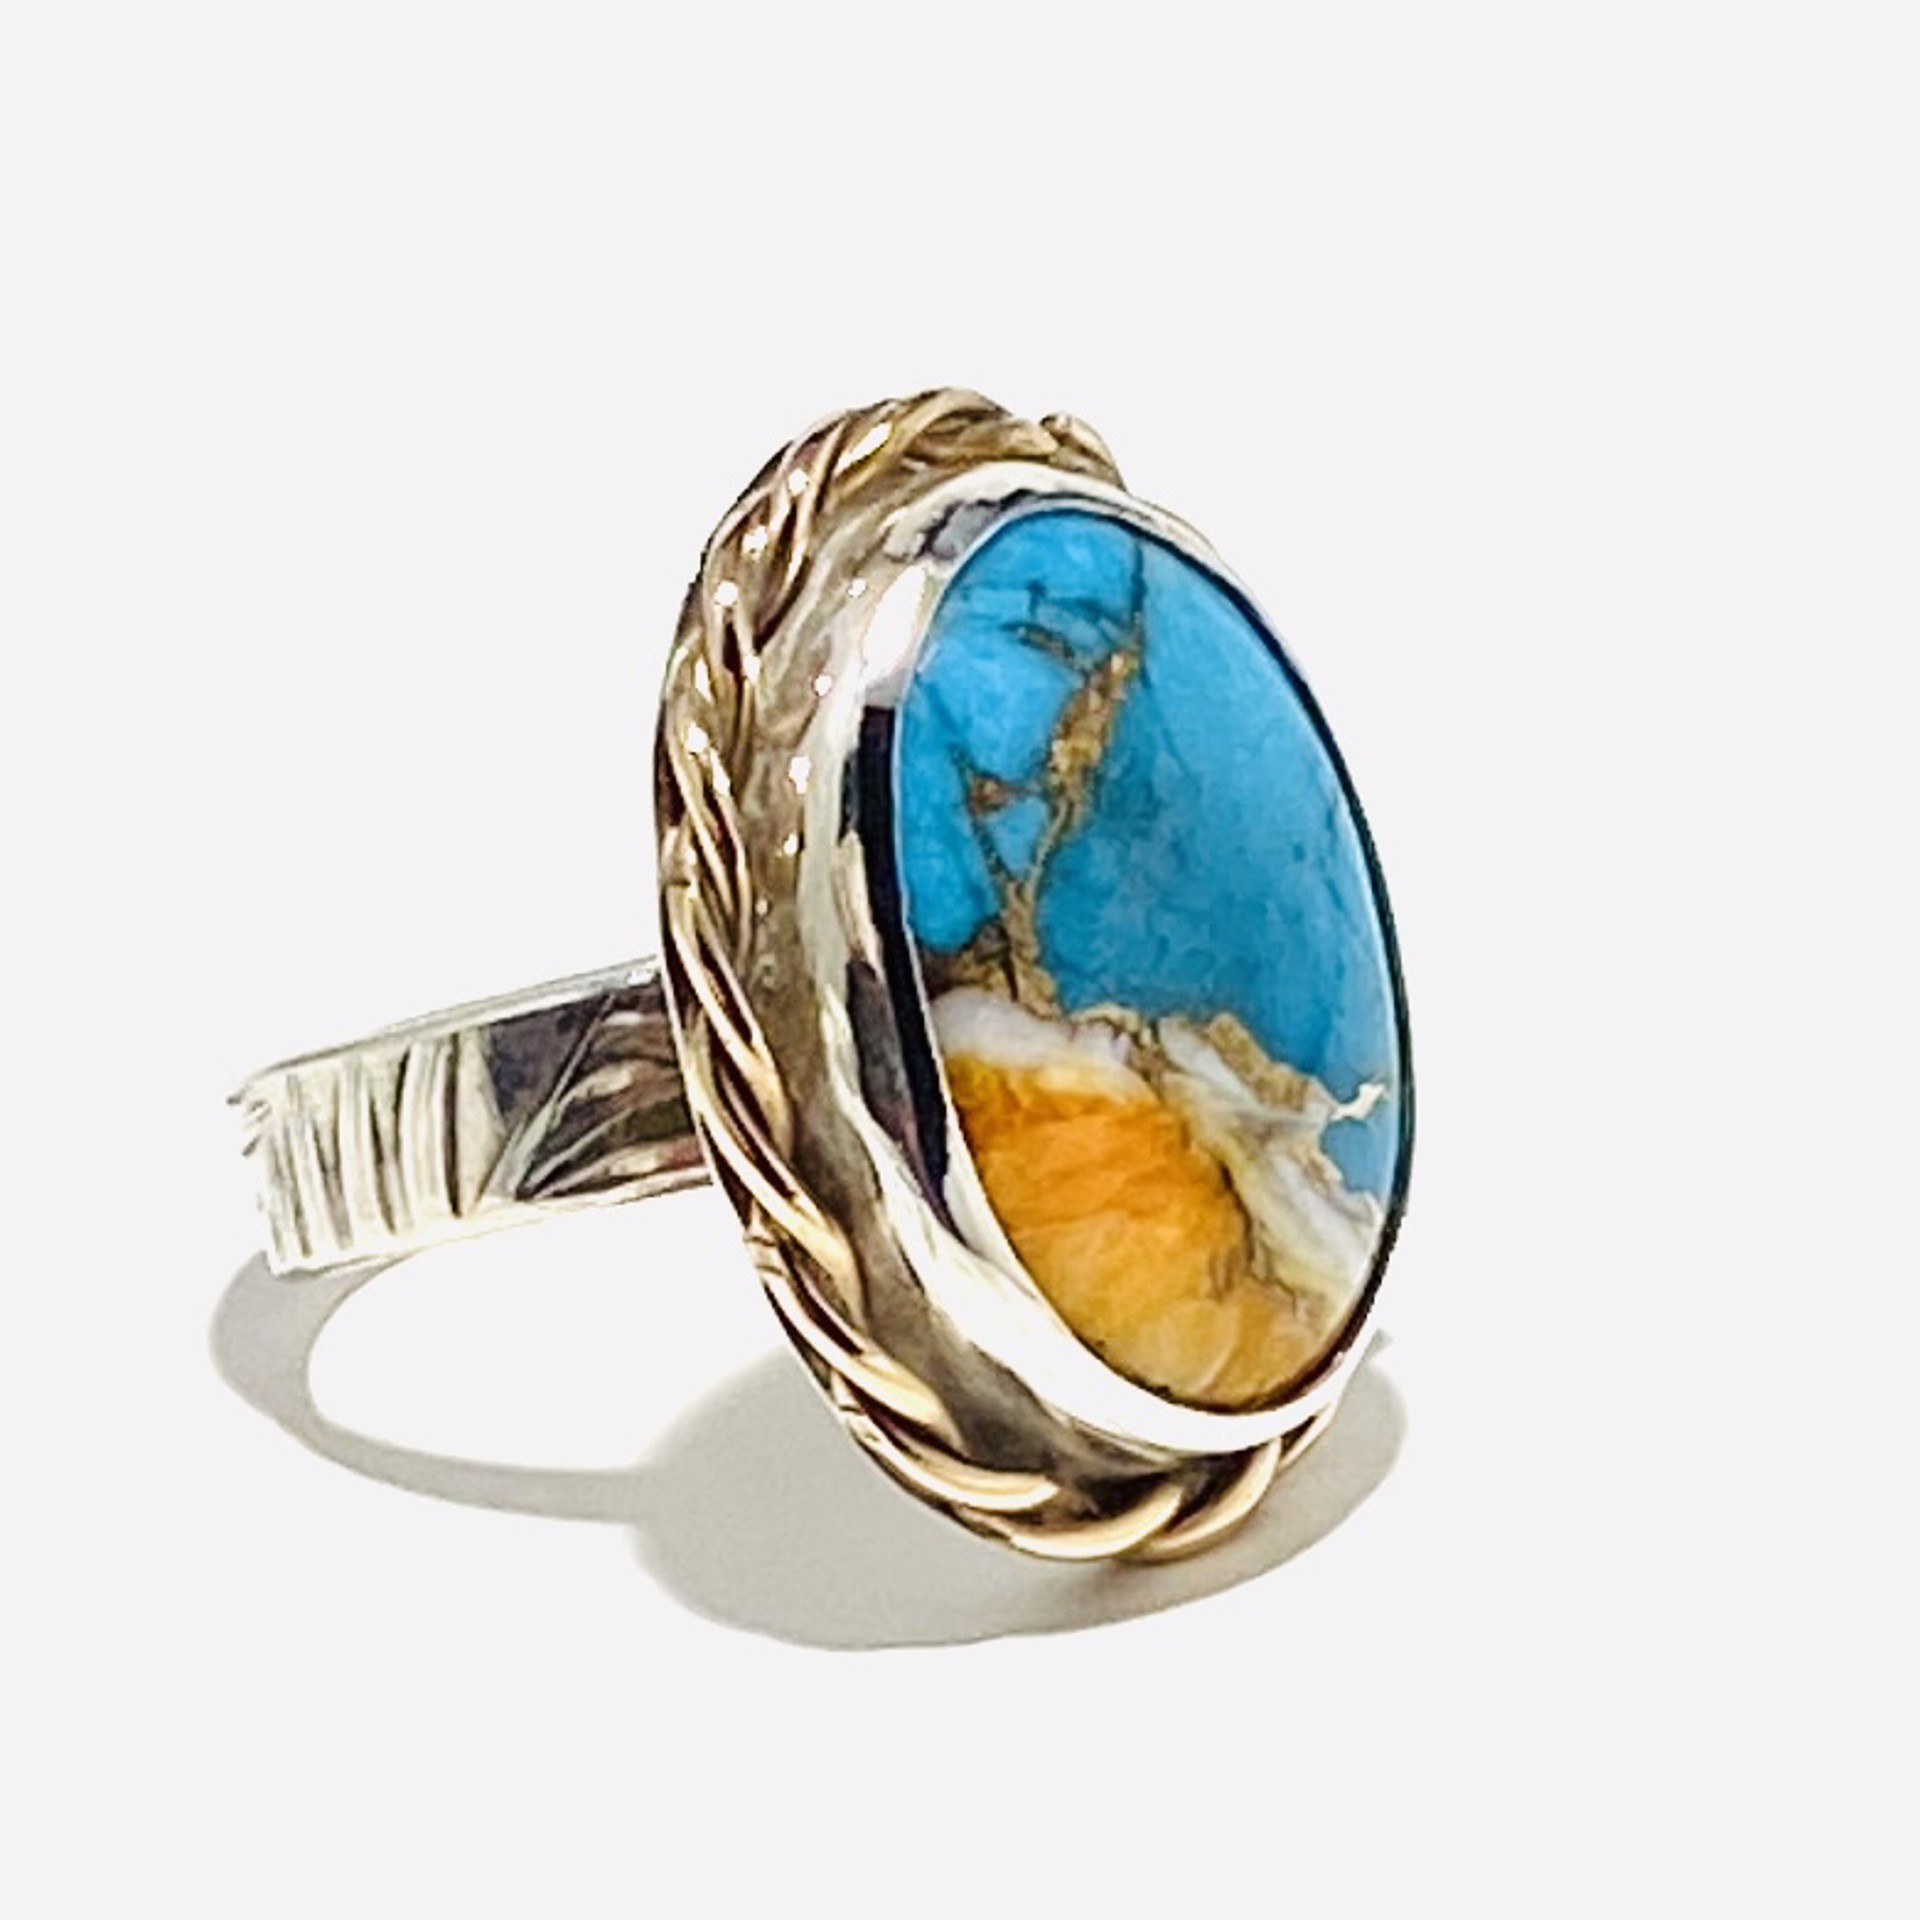 AB23-5 Oval Cabochon Turquoise Spiney Oyster Bronze (composite) Broze Rope Bezel Ring sz9.5 by Anne Bivens